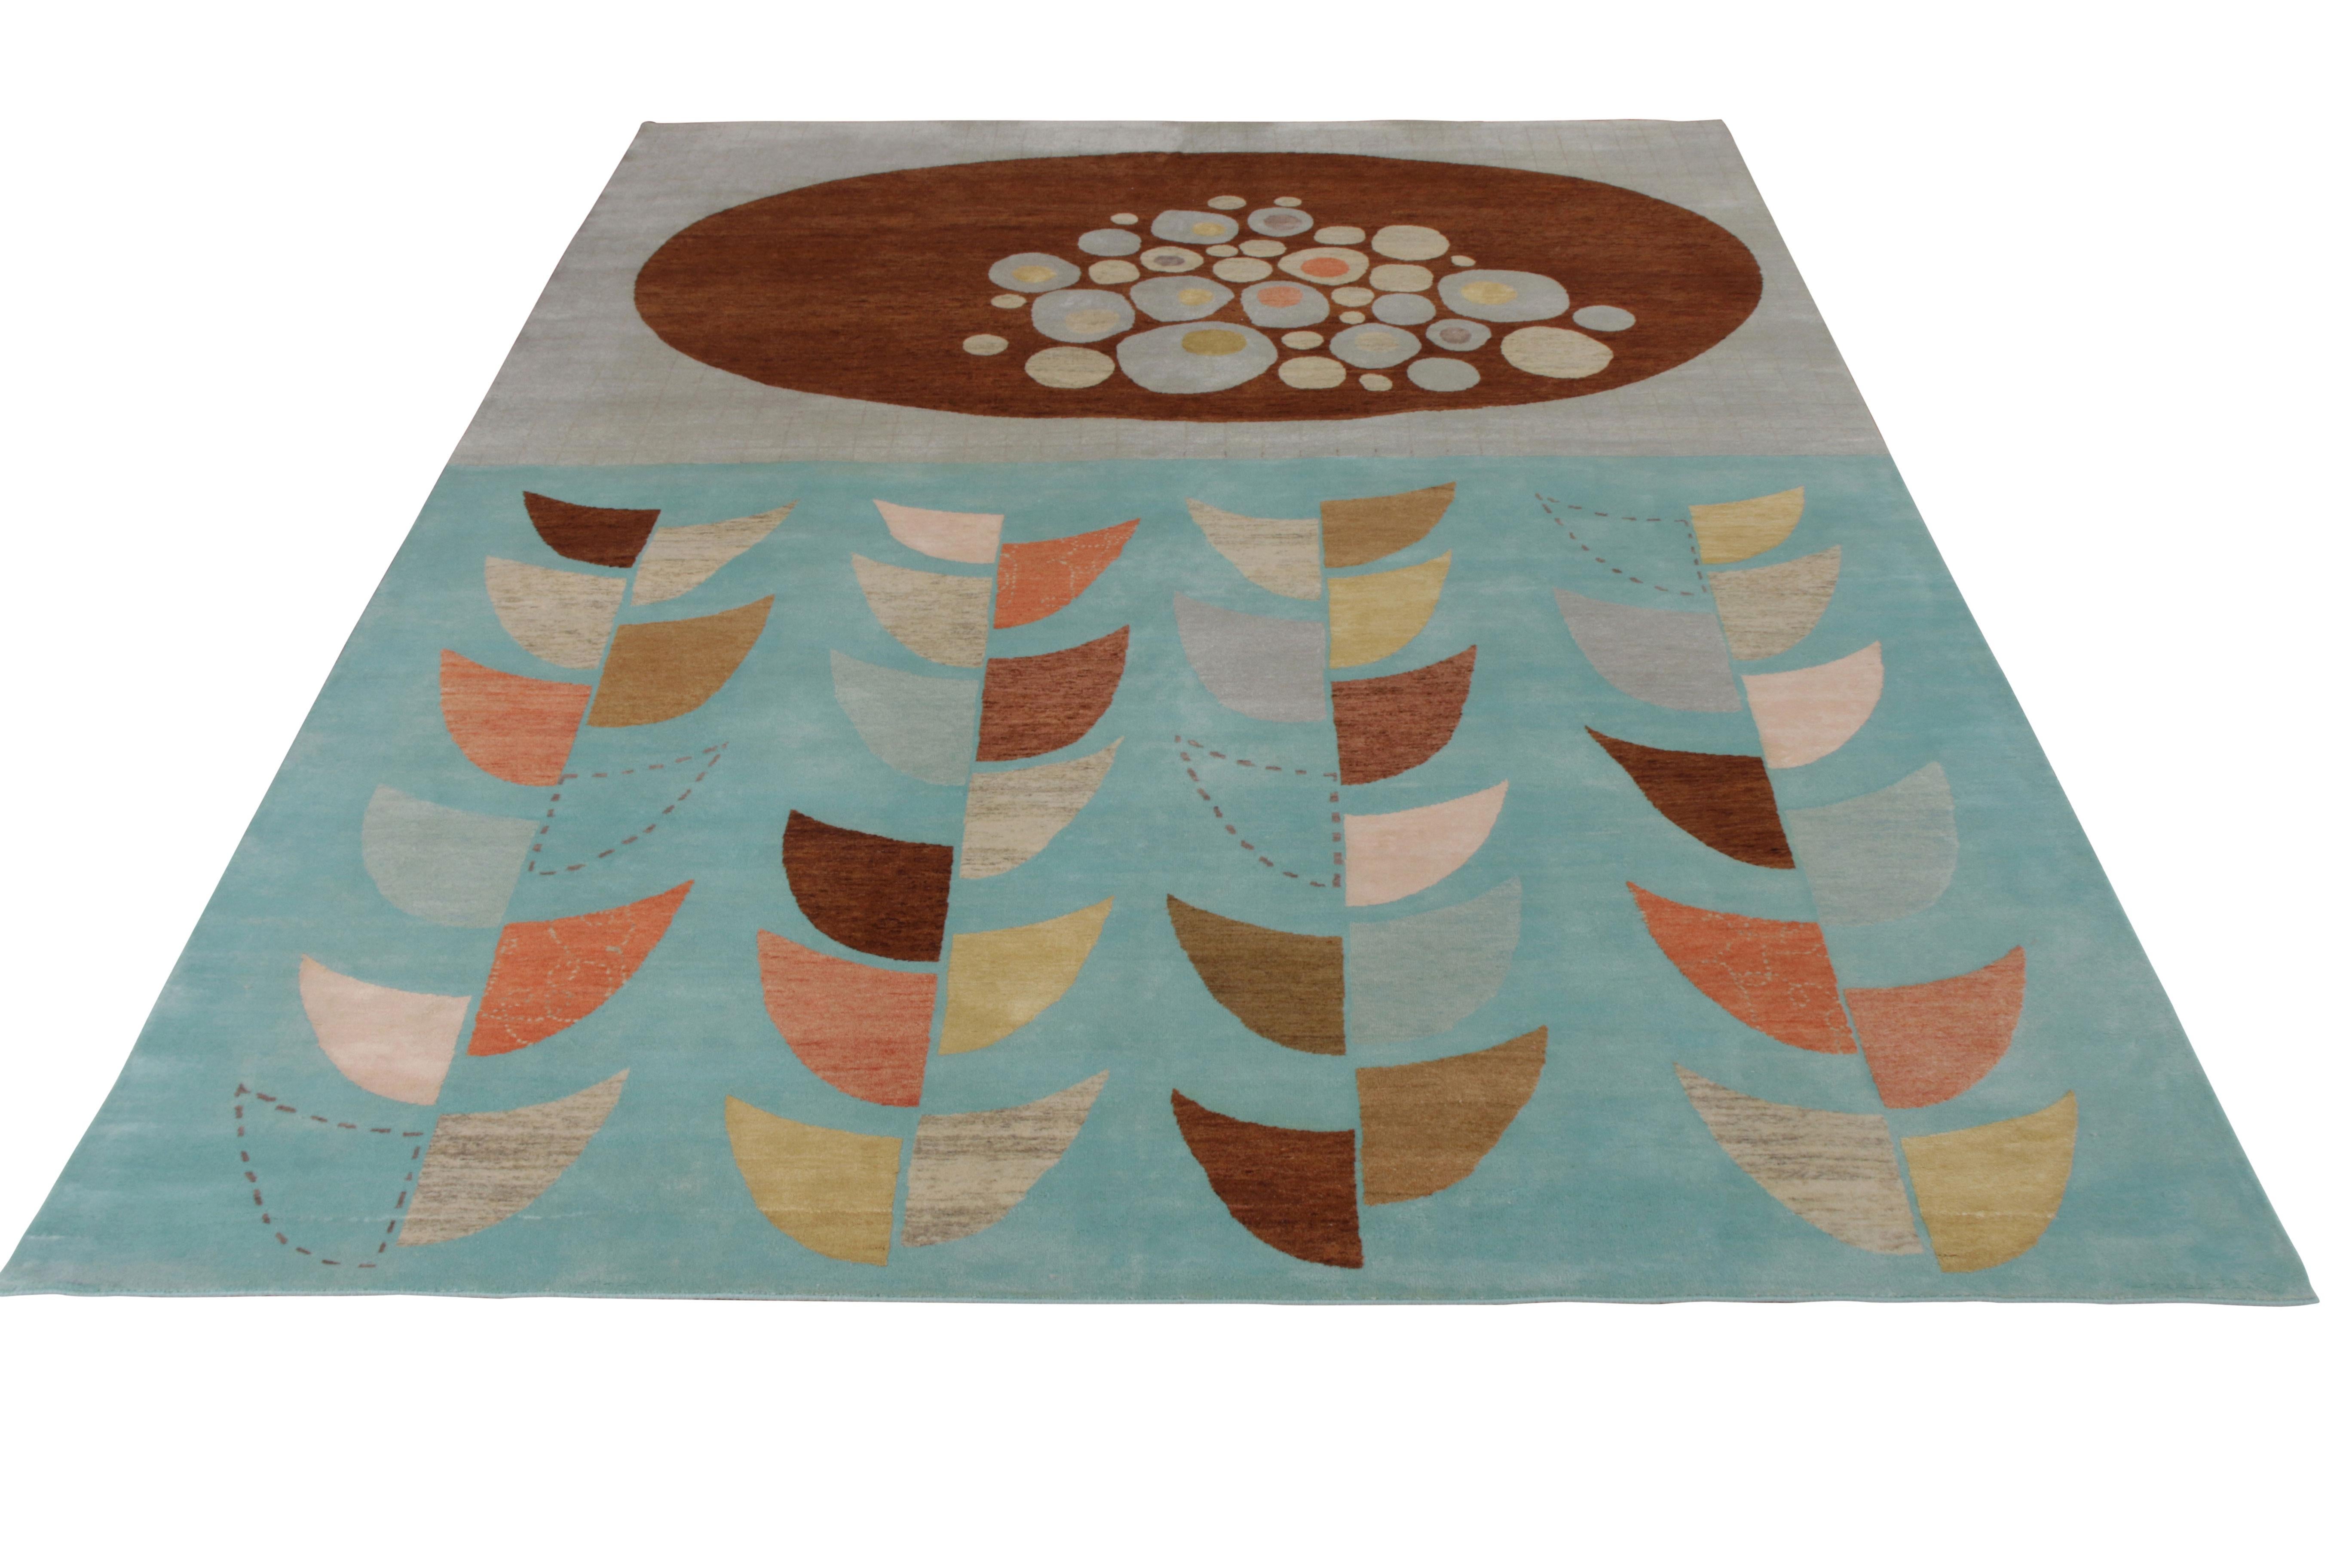 A 9x12 rug from the Mid-Century Modern Collection by Rug & Kilim, in collaboration with modern artist Jenn Ski. Hand knotted in wool and all-natural silk with prevailing blue and beige-brown colorways.

On the Design: This Mid-Century Modern rug